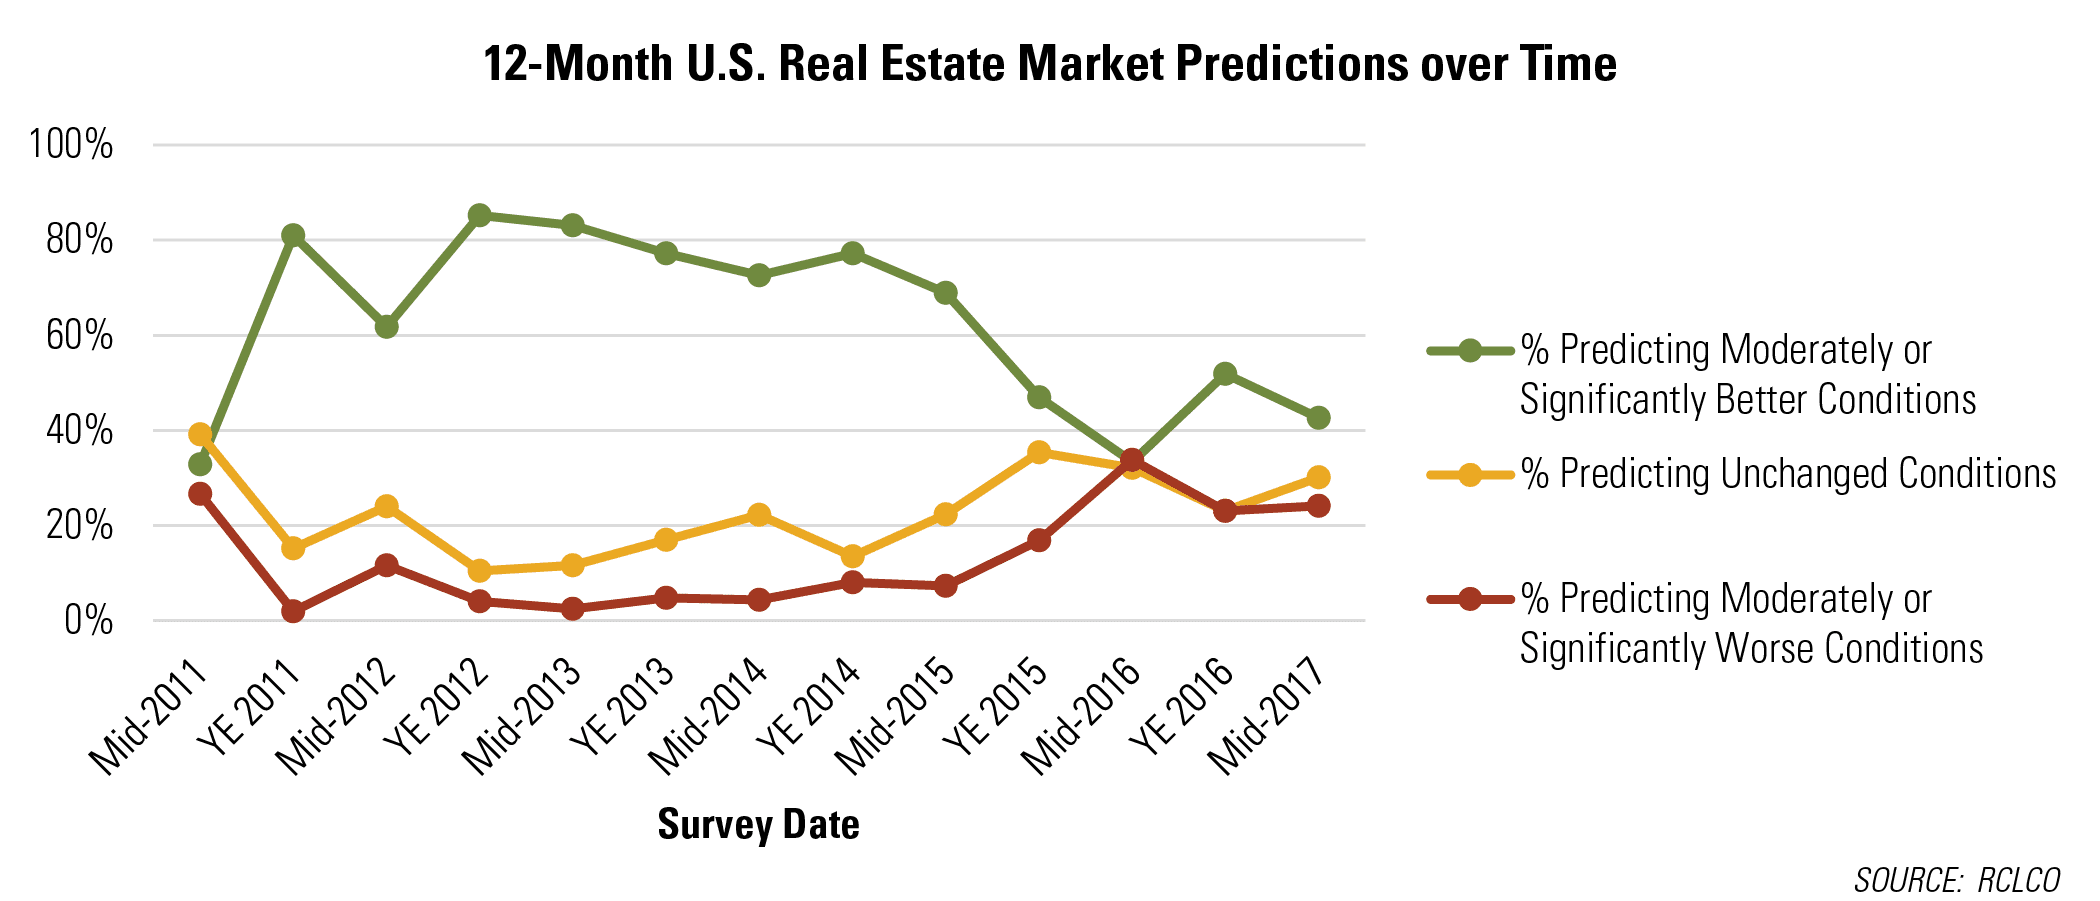 12-Month U.S. Real Estate Market Predictions over Time